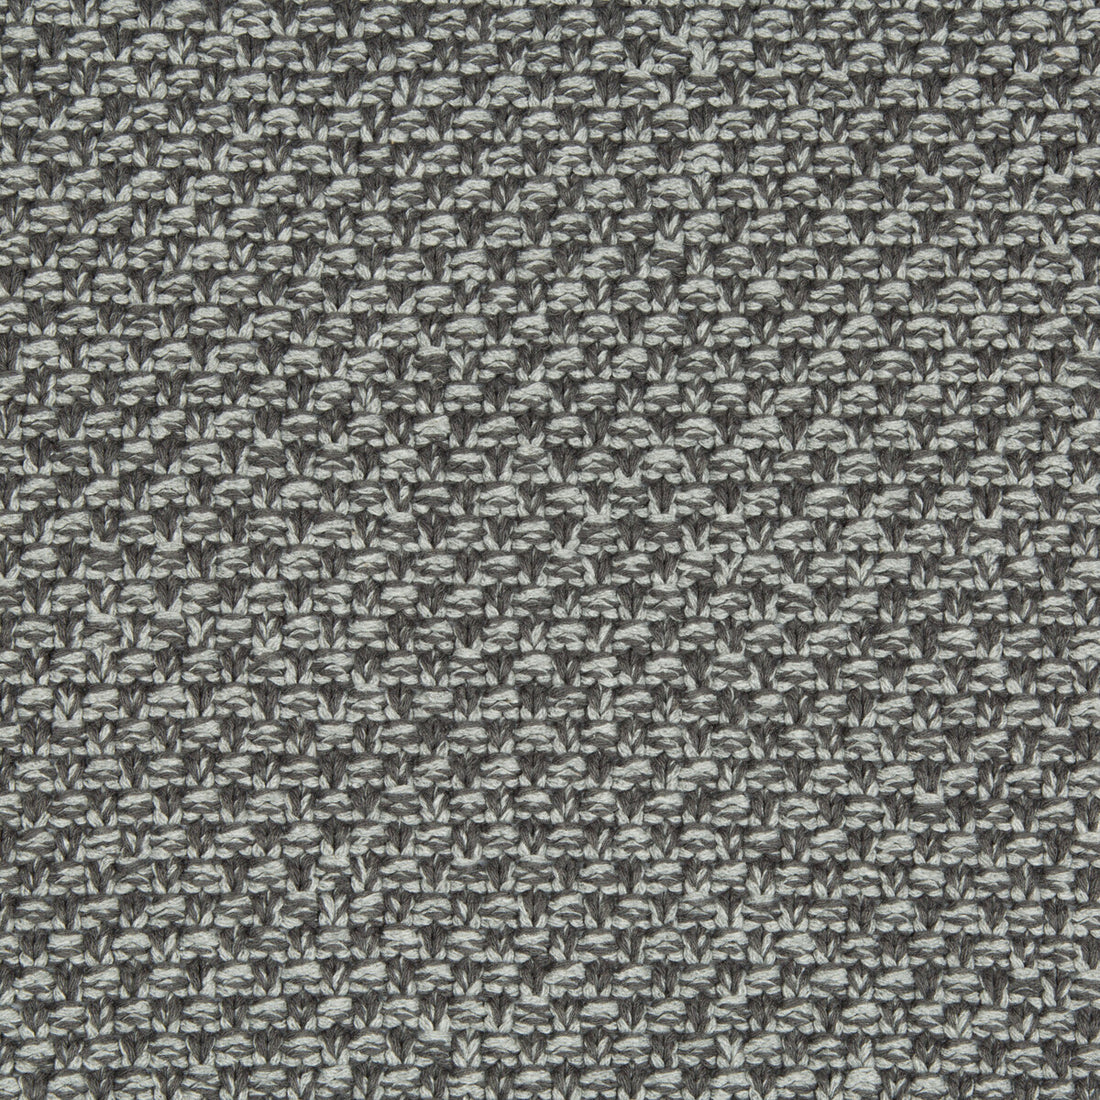 Maglia fabric in grey heather color - pattern 34910.21.0 - by Kravet Couture in the Modern Tailor collection